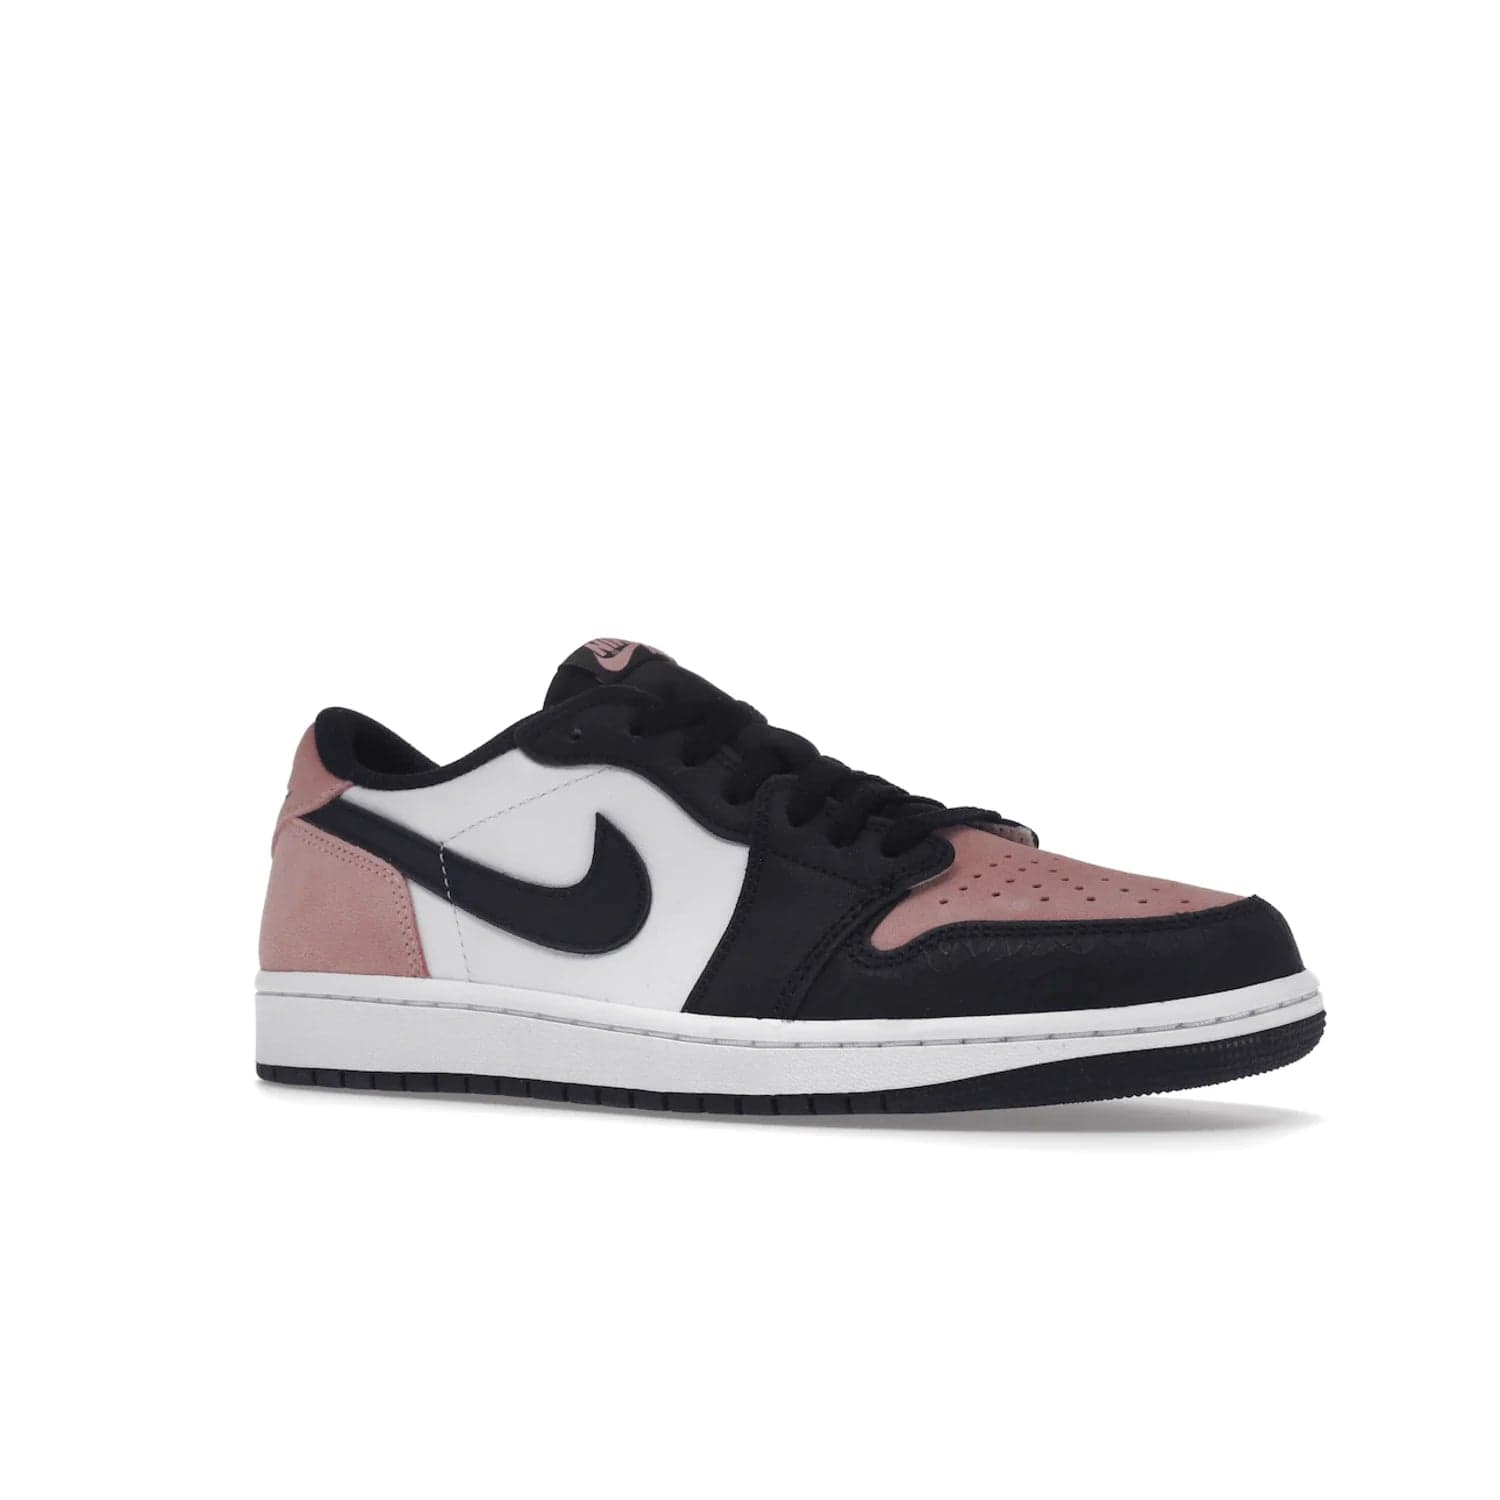 Jordan 1 Low OG Bleached Coral - Image 4 - Only at www.BallersClubKickz.com - Introducing the Air Jordan 1 Low OG Bleached Coral. Constructed with white leather, black cracked leather & Bleached Coral suede. Signature Jordan Wings logo, white Air sole. Get the pack in July 2022 and stand out.